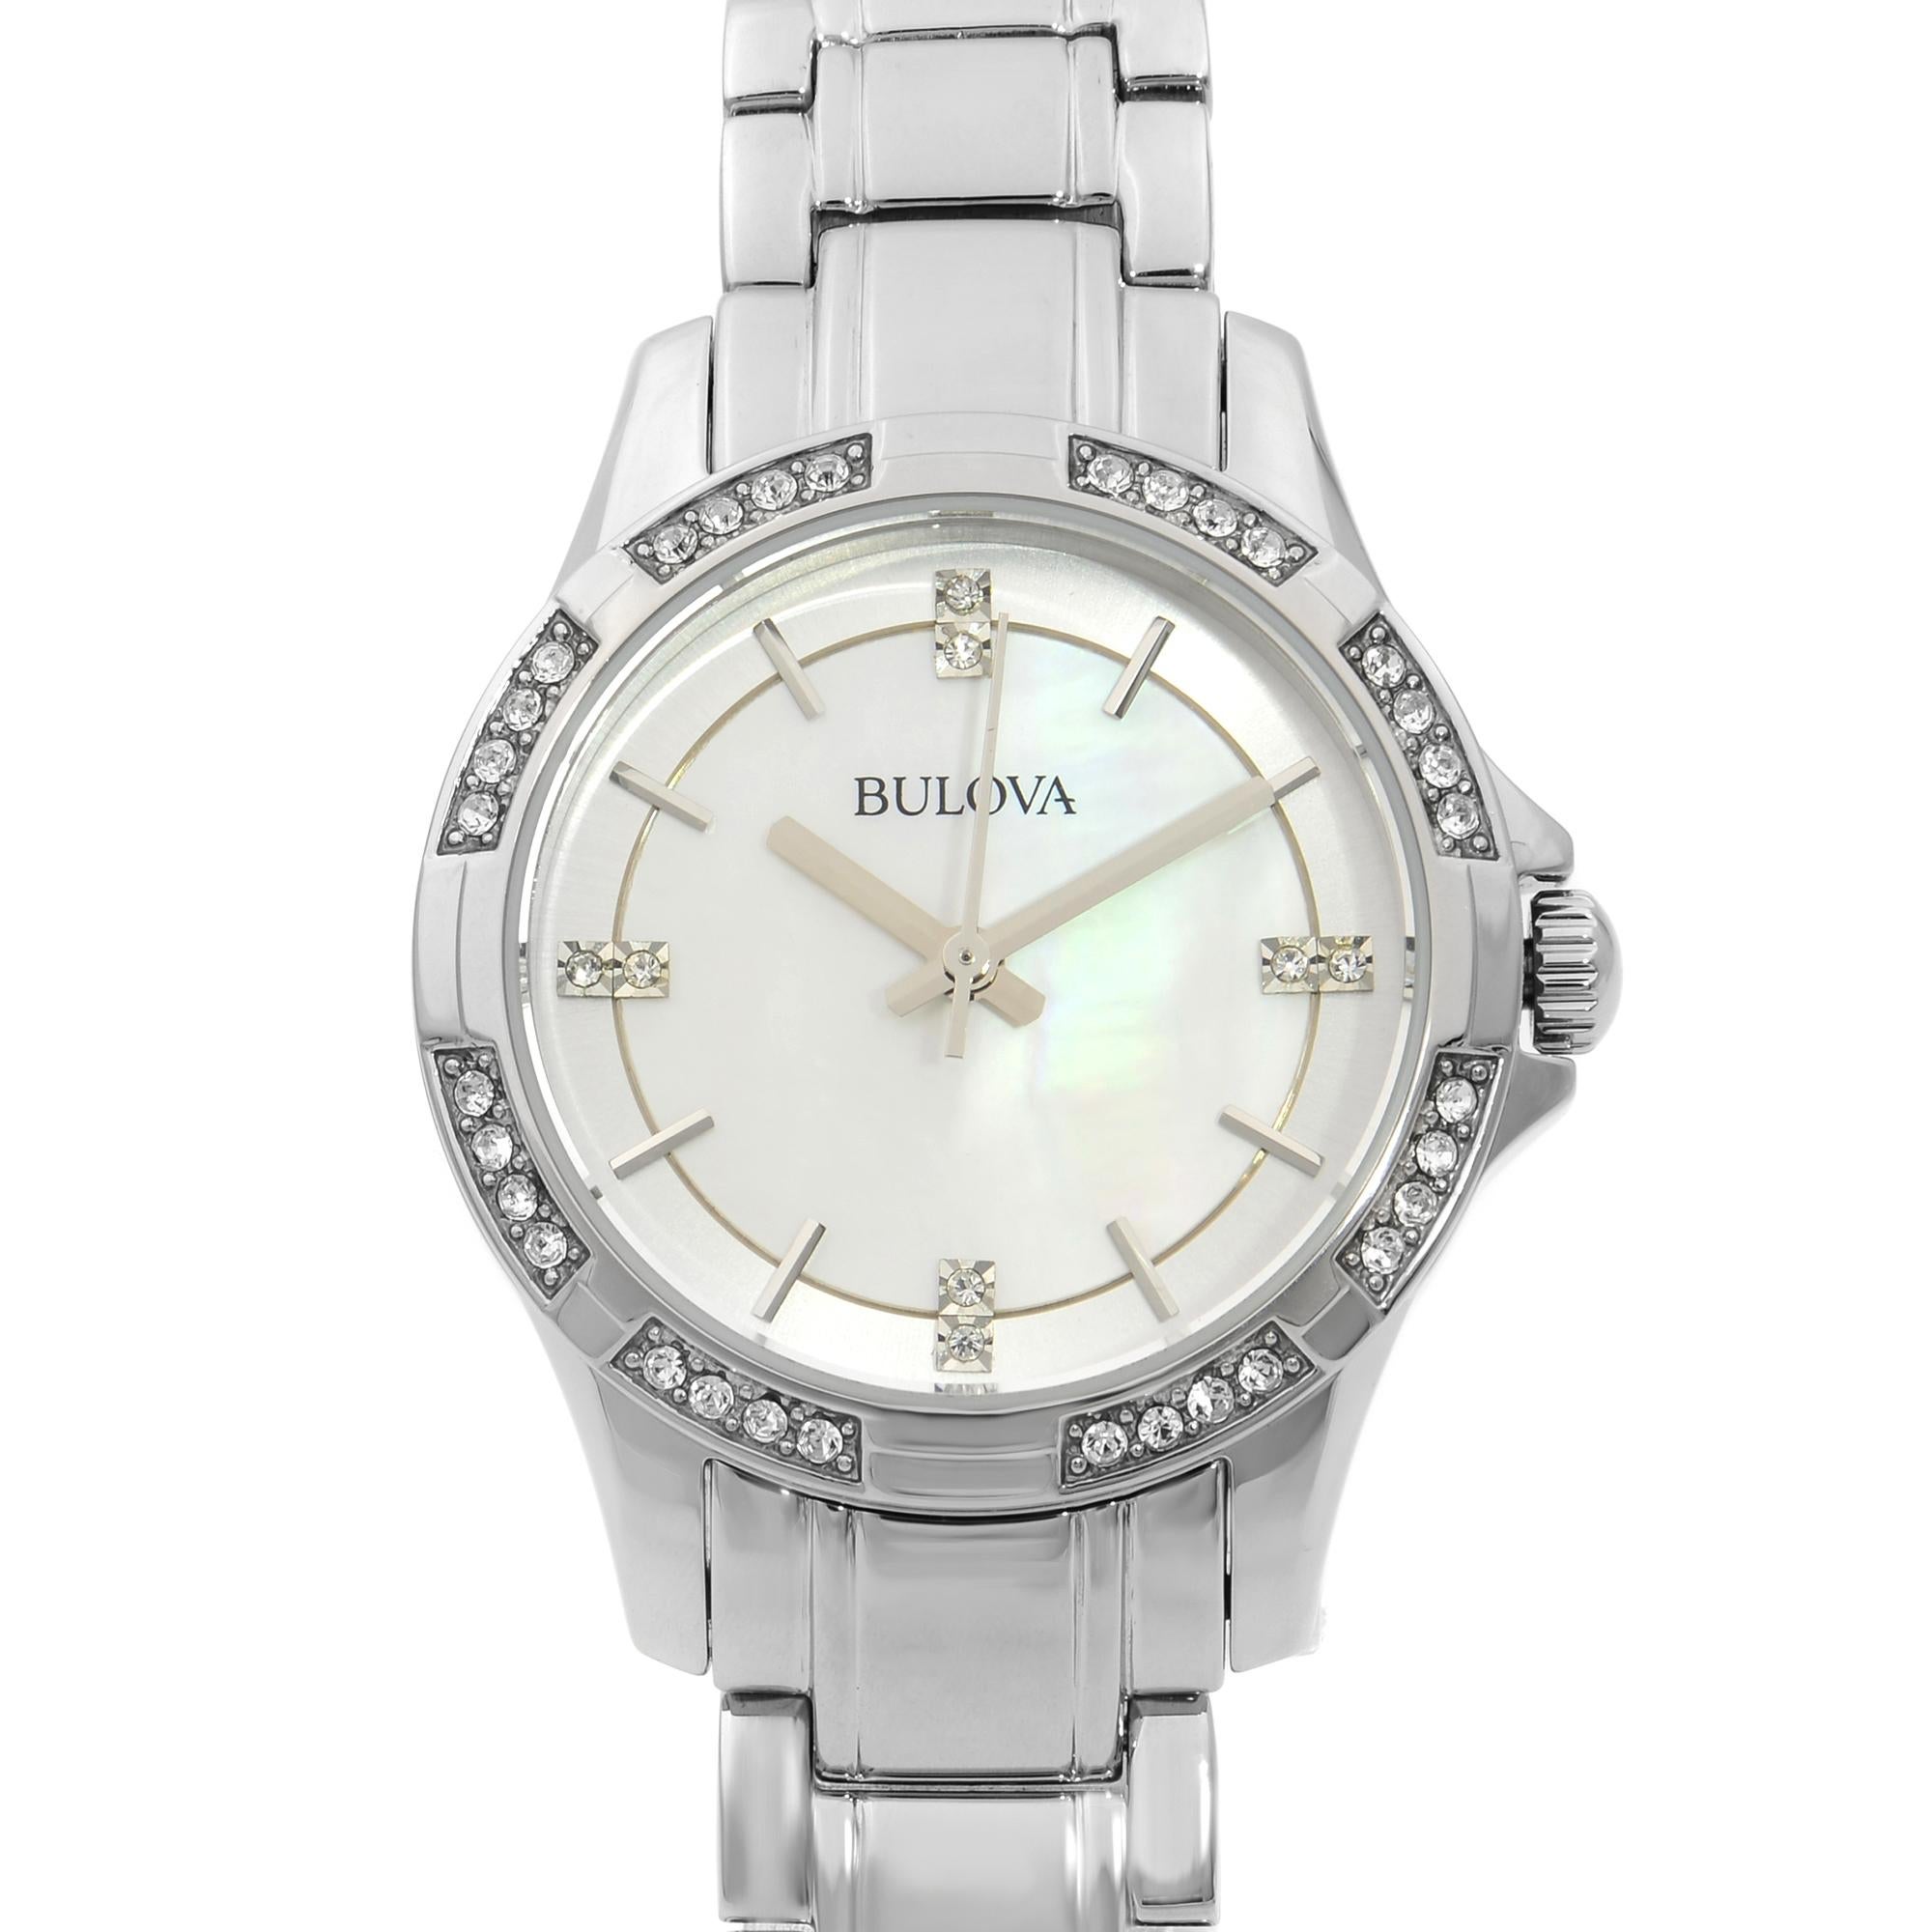 This display model Bulova 96L191  Watch is a beautiful womens timepiece that is powered by quartz (battery) movement which is cased in a stainless steel case. It has a round shape face, and has hand sticks style markers. It is completed with a